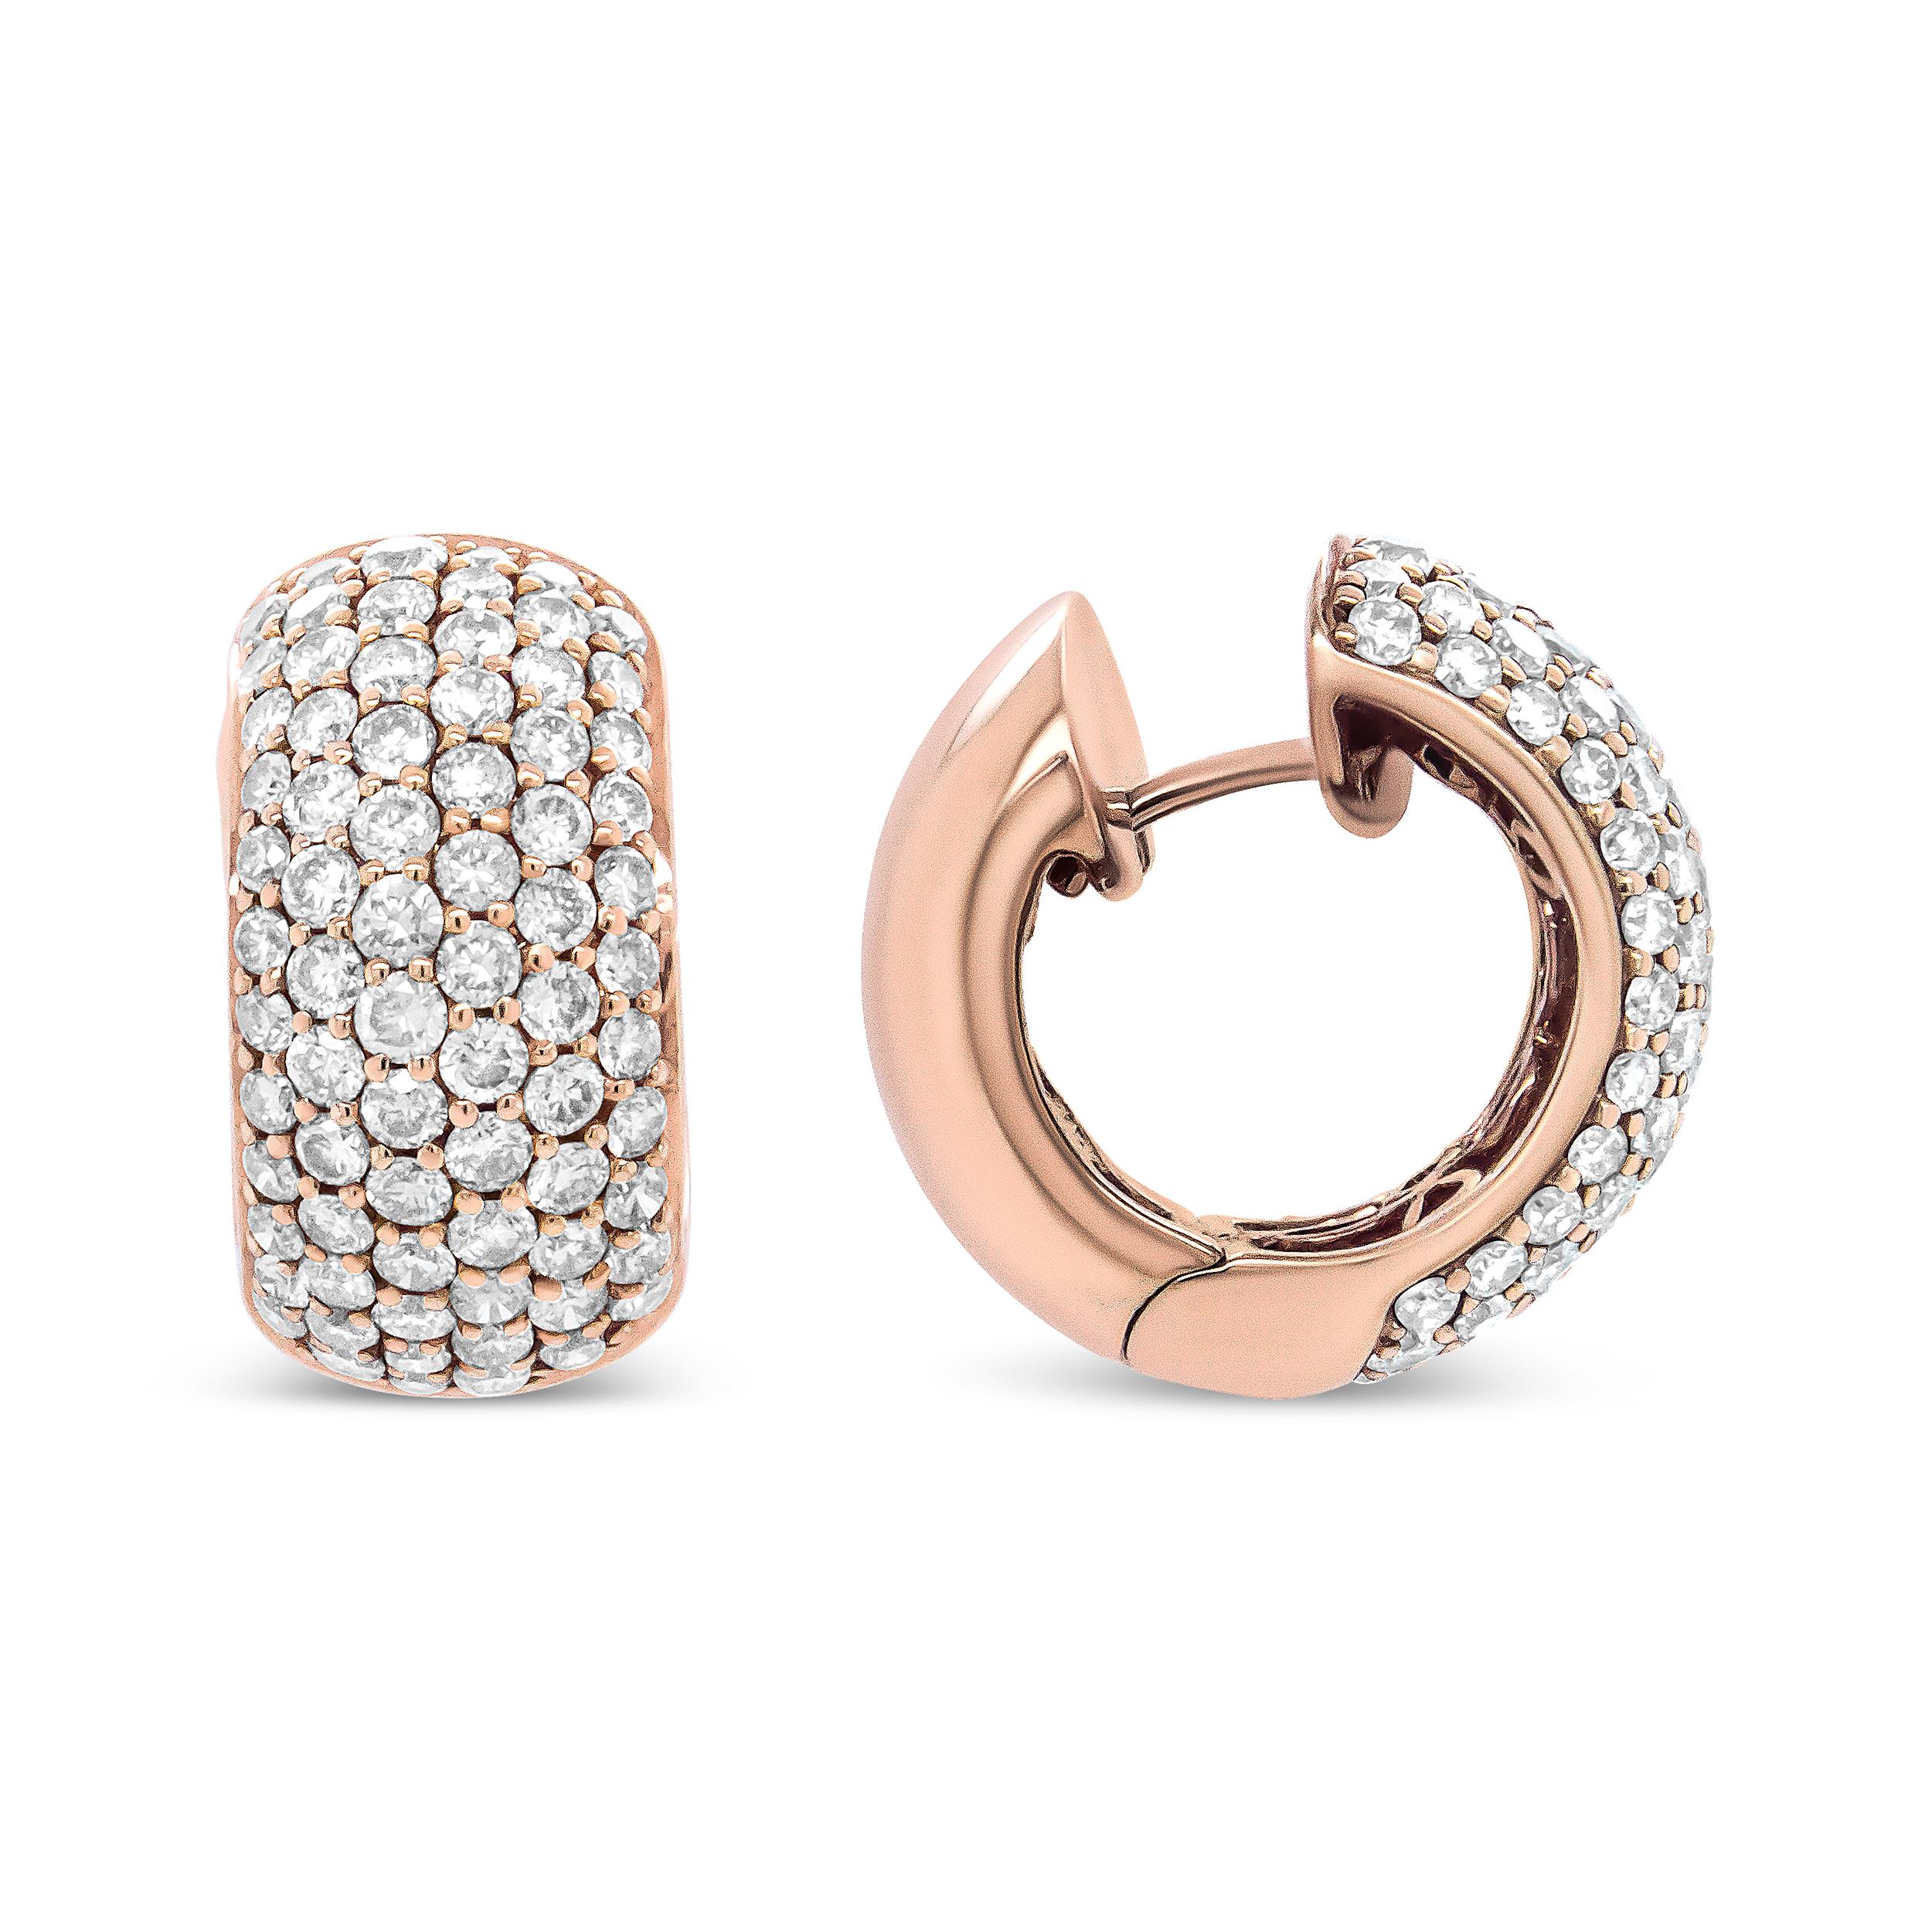 Crafted of genuine 18k rose gold, these hoop earrings show off the brilliance of 148 diamonds with a total 3 1/8 cttw and an approximate J-K Color and VS1-VS2 Clarity. These classic hoops show off an updated domed silhouette with prong-set round